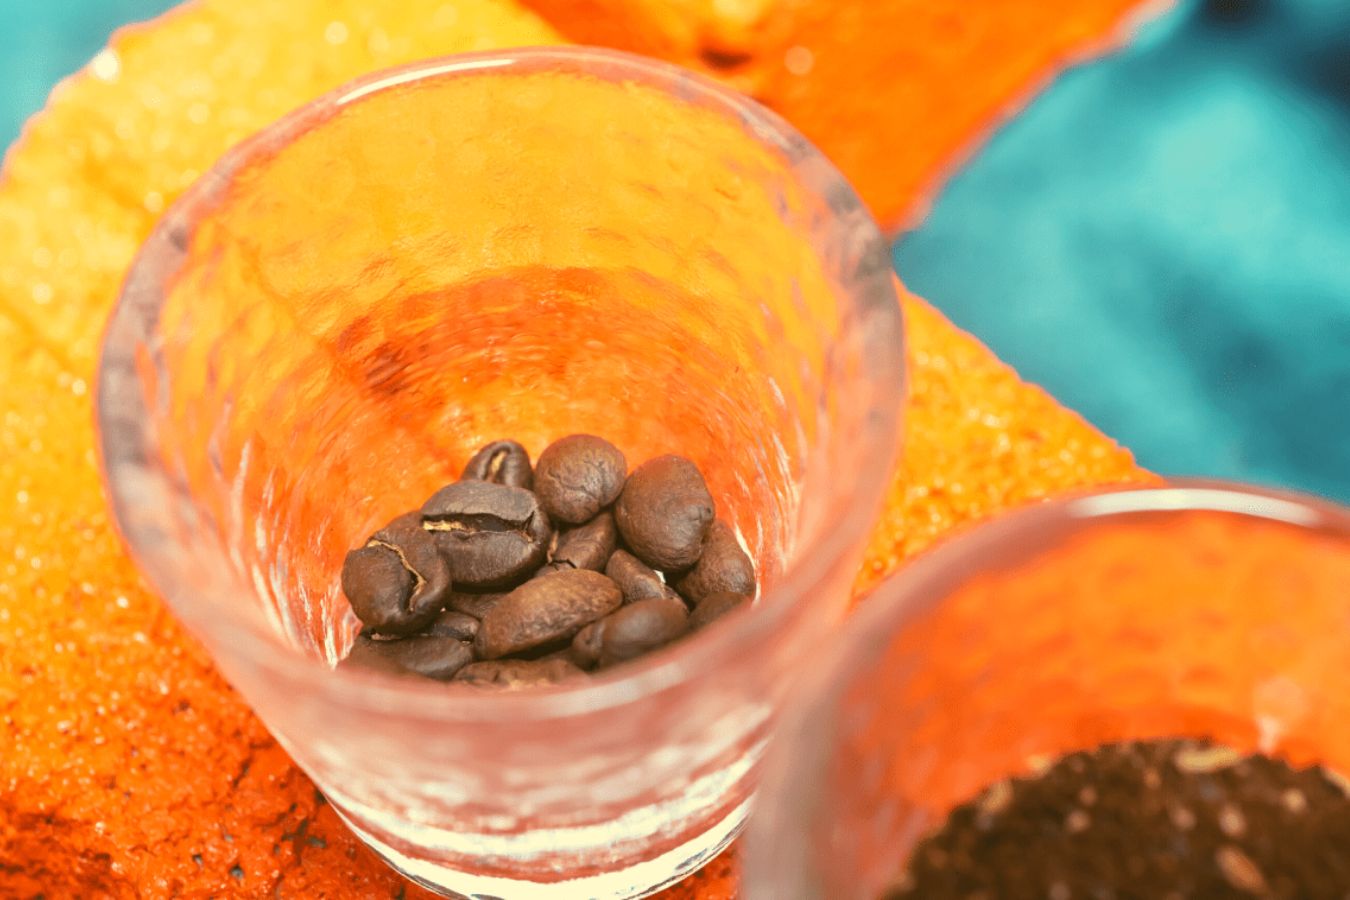 Can You Eat Raw Coffee Beans Potential Benefits Of This (1)